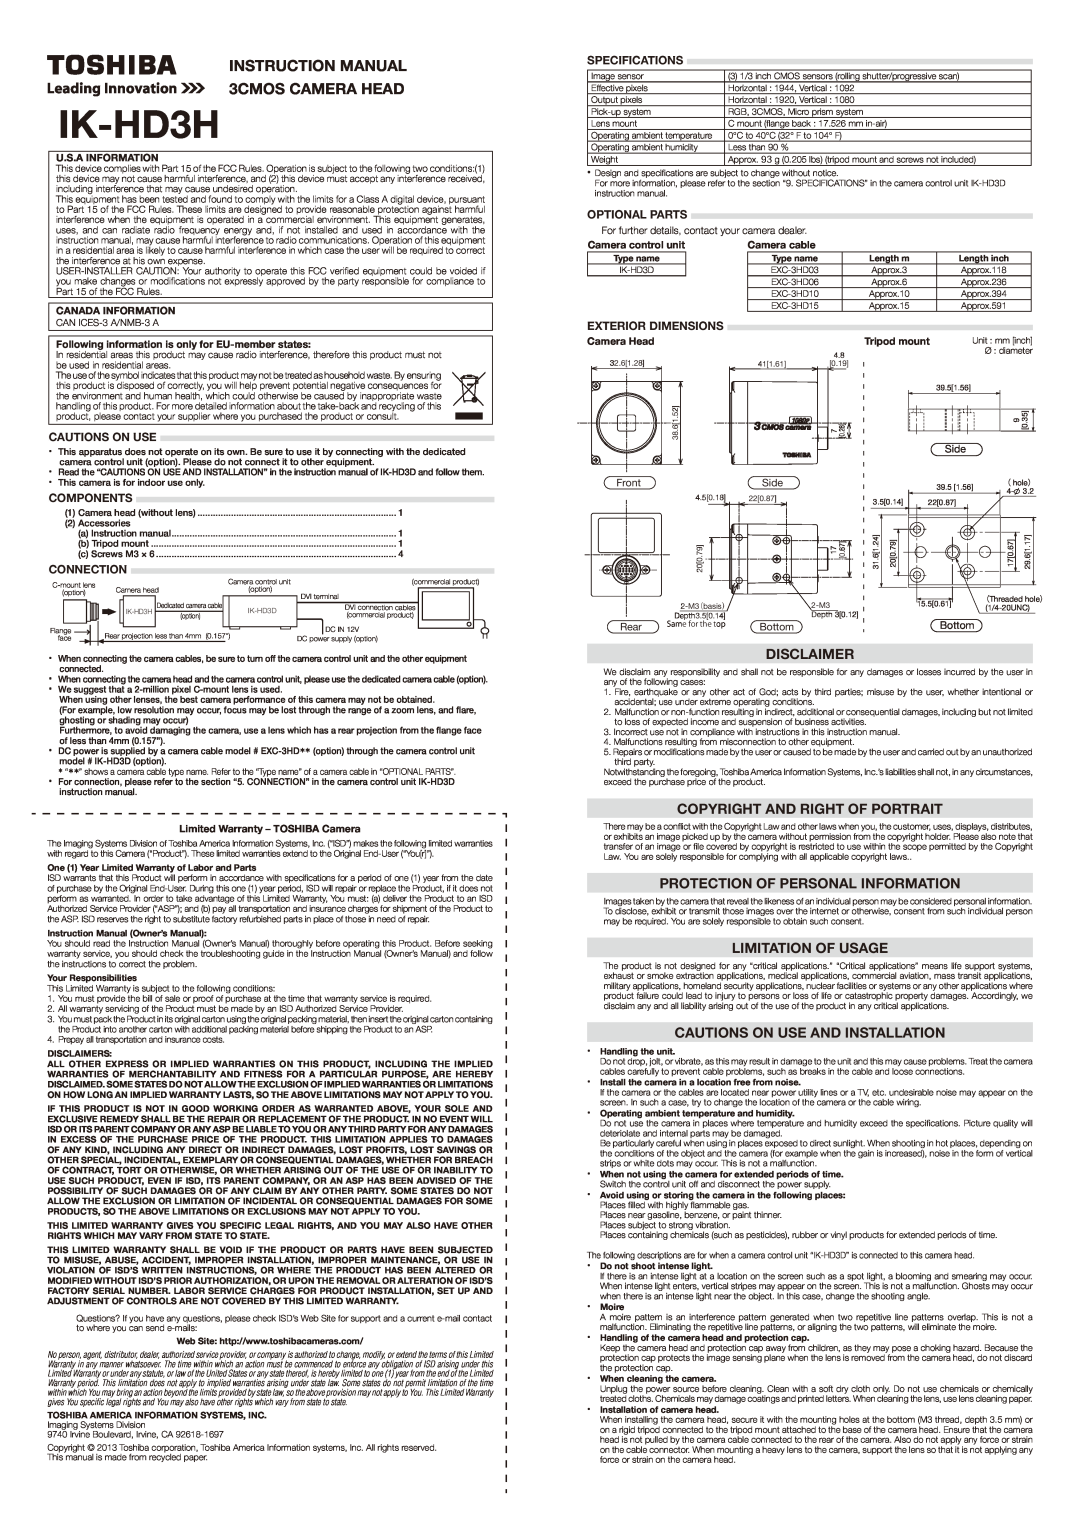 Toshiba IK-HD3H instruction manual Disclaimer, Copyright And Right Of Portrait, Protection Of Personal Information, Front 